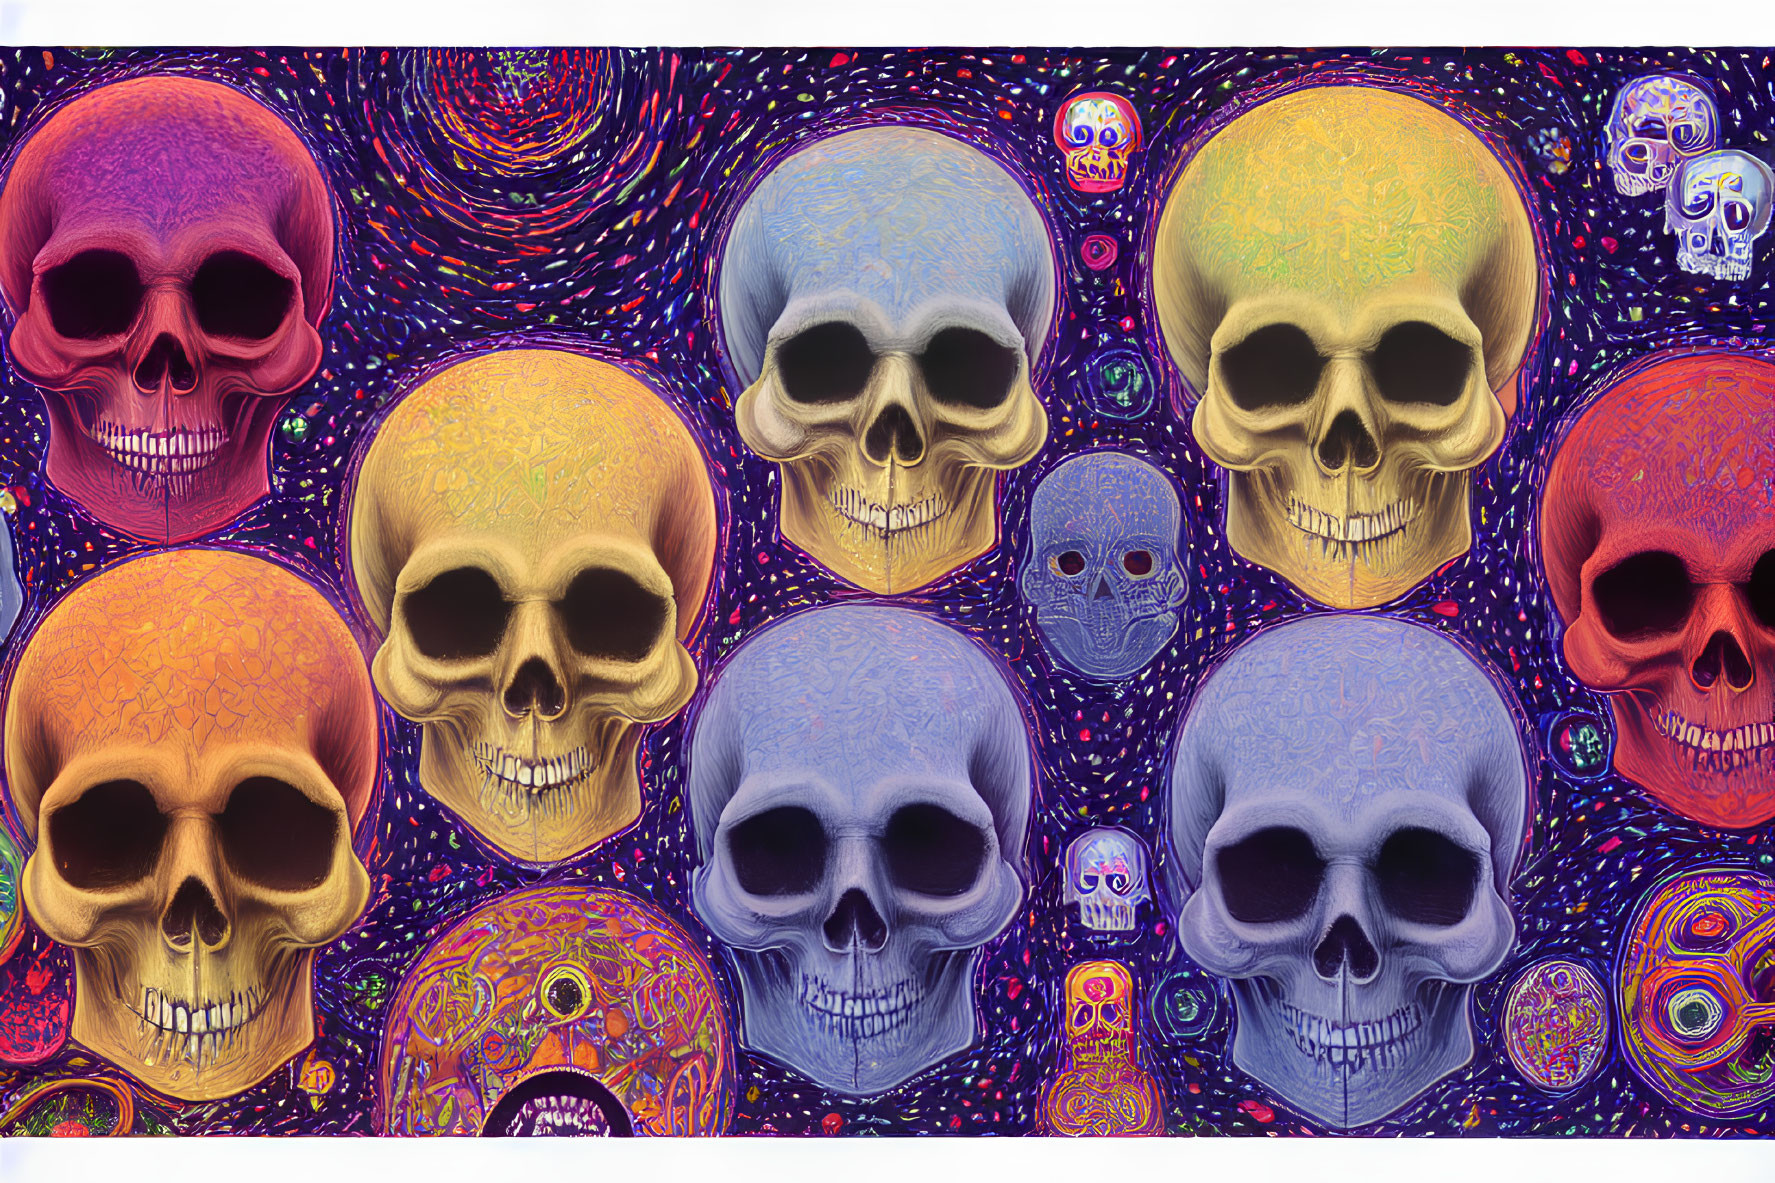 Vibrant Skull Artwork with Psychedelic Patterns